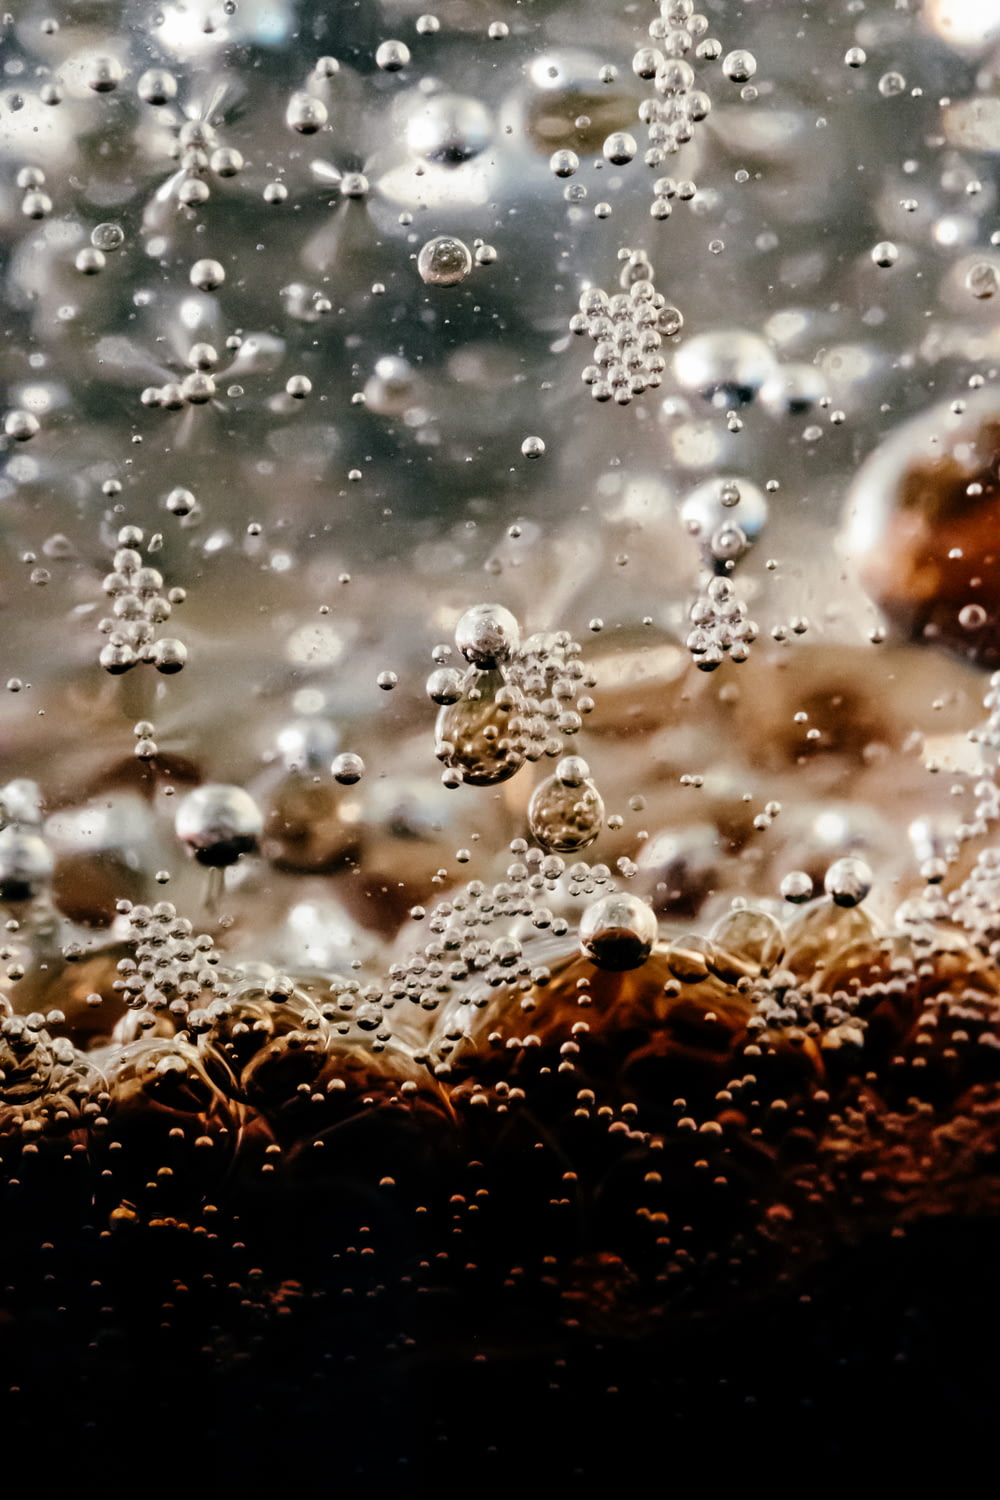 a close up of water bubbles on a surface